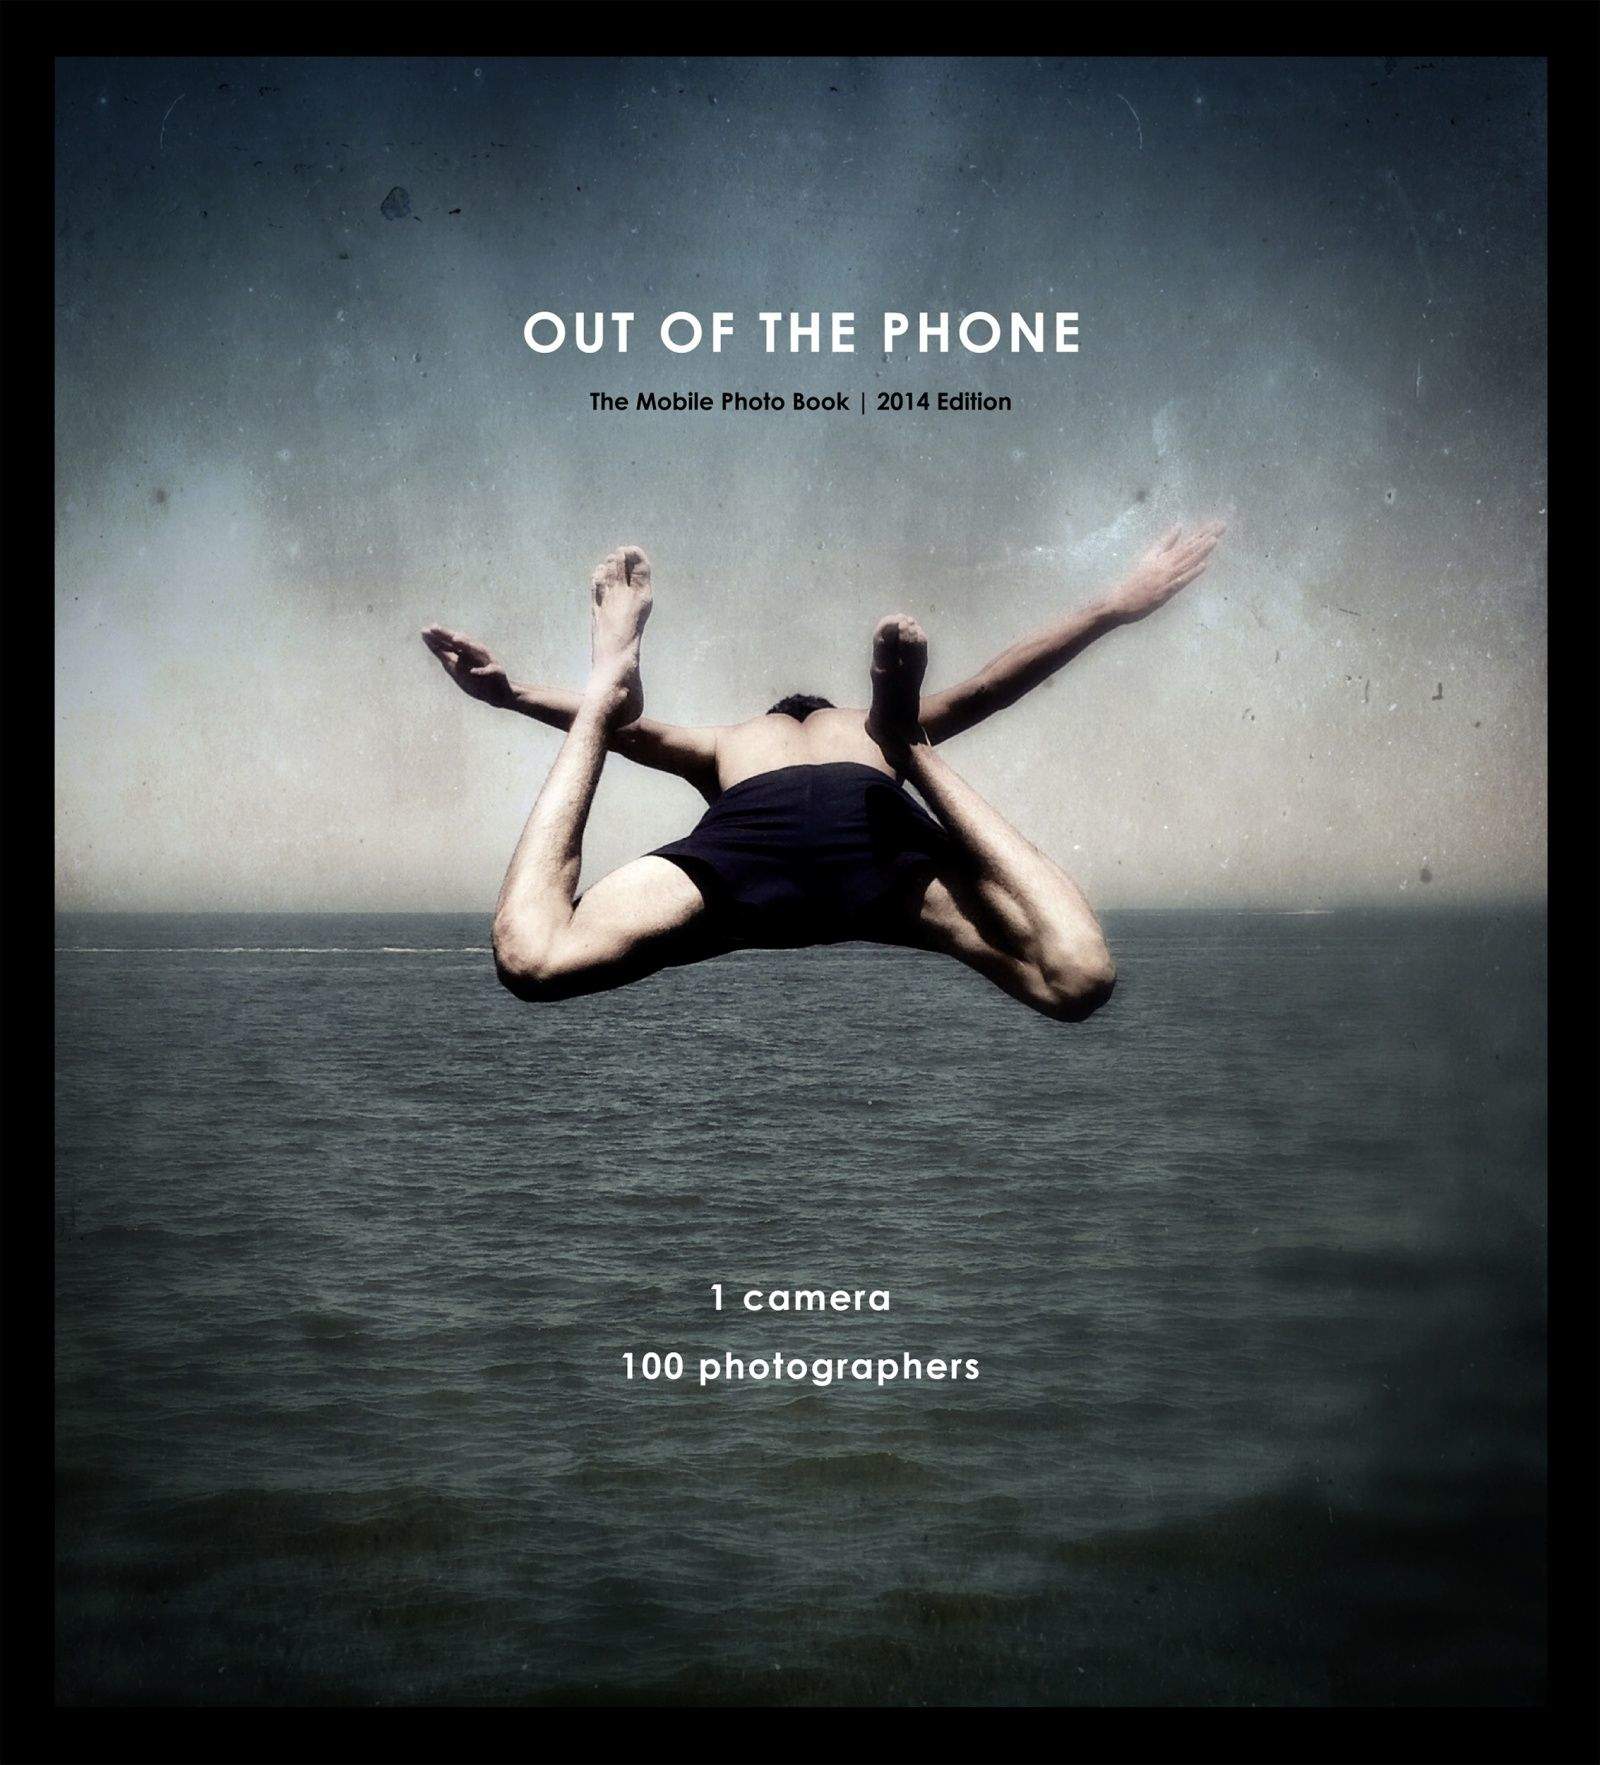 Out of the Phone features 100 of the best photographs made with mobile phones in 2014. Cover photo by Jason Flett